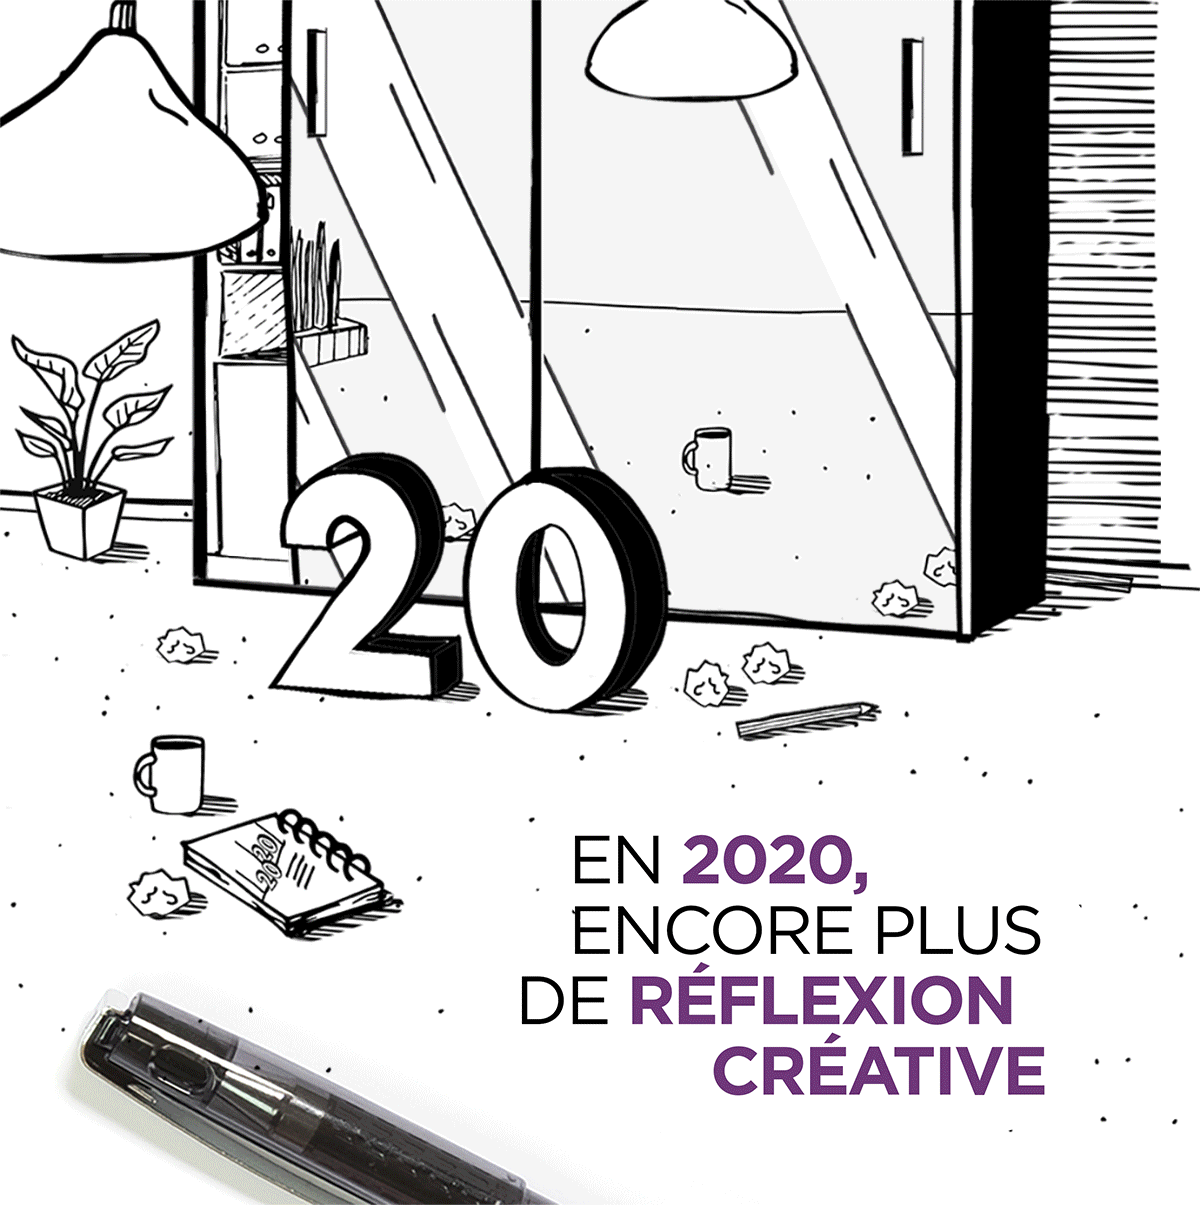 Voeux-2020-ad-n-you